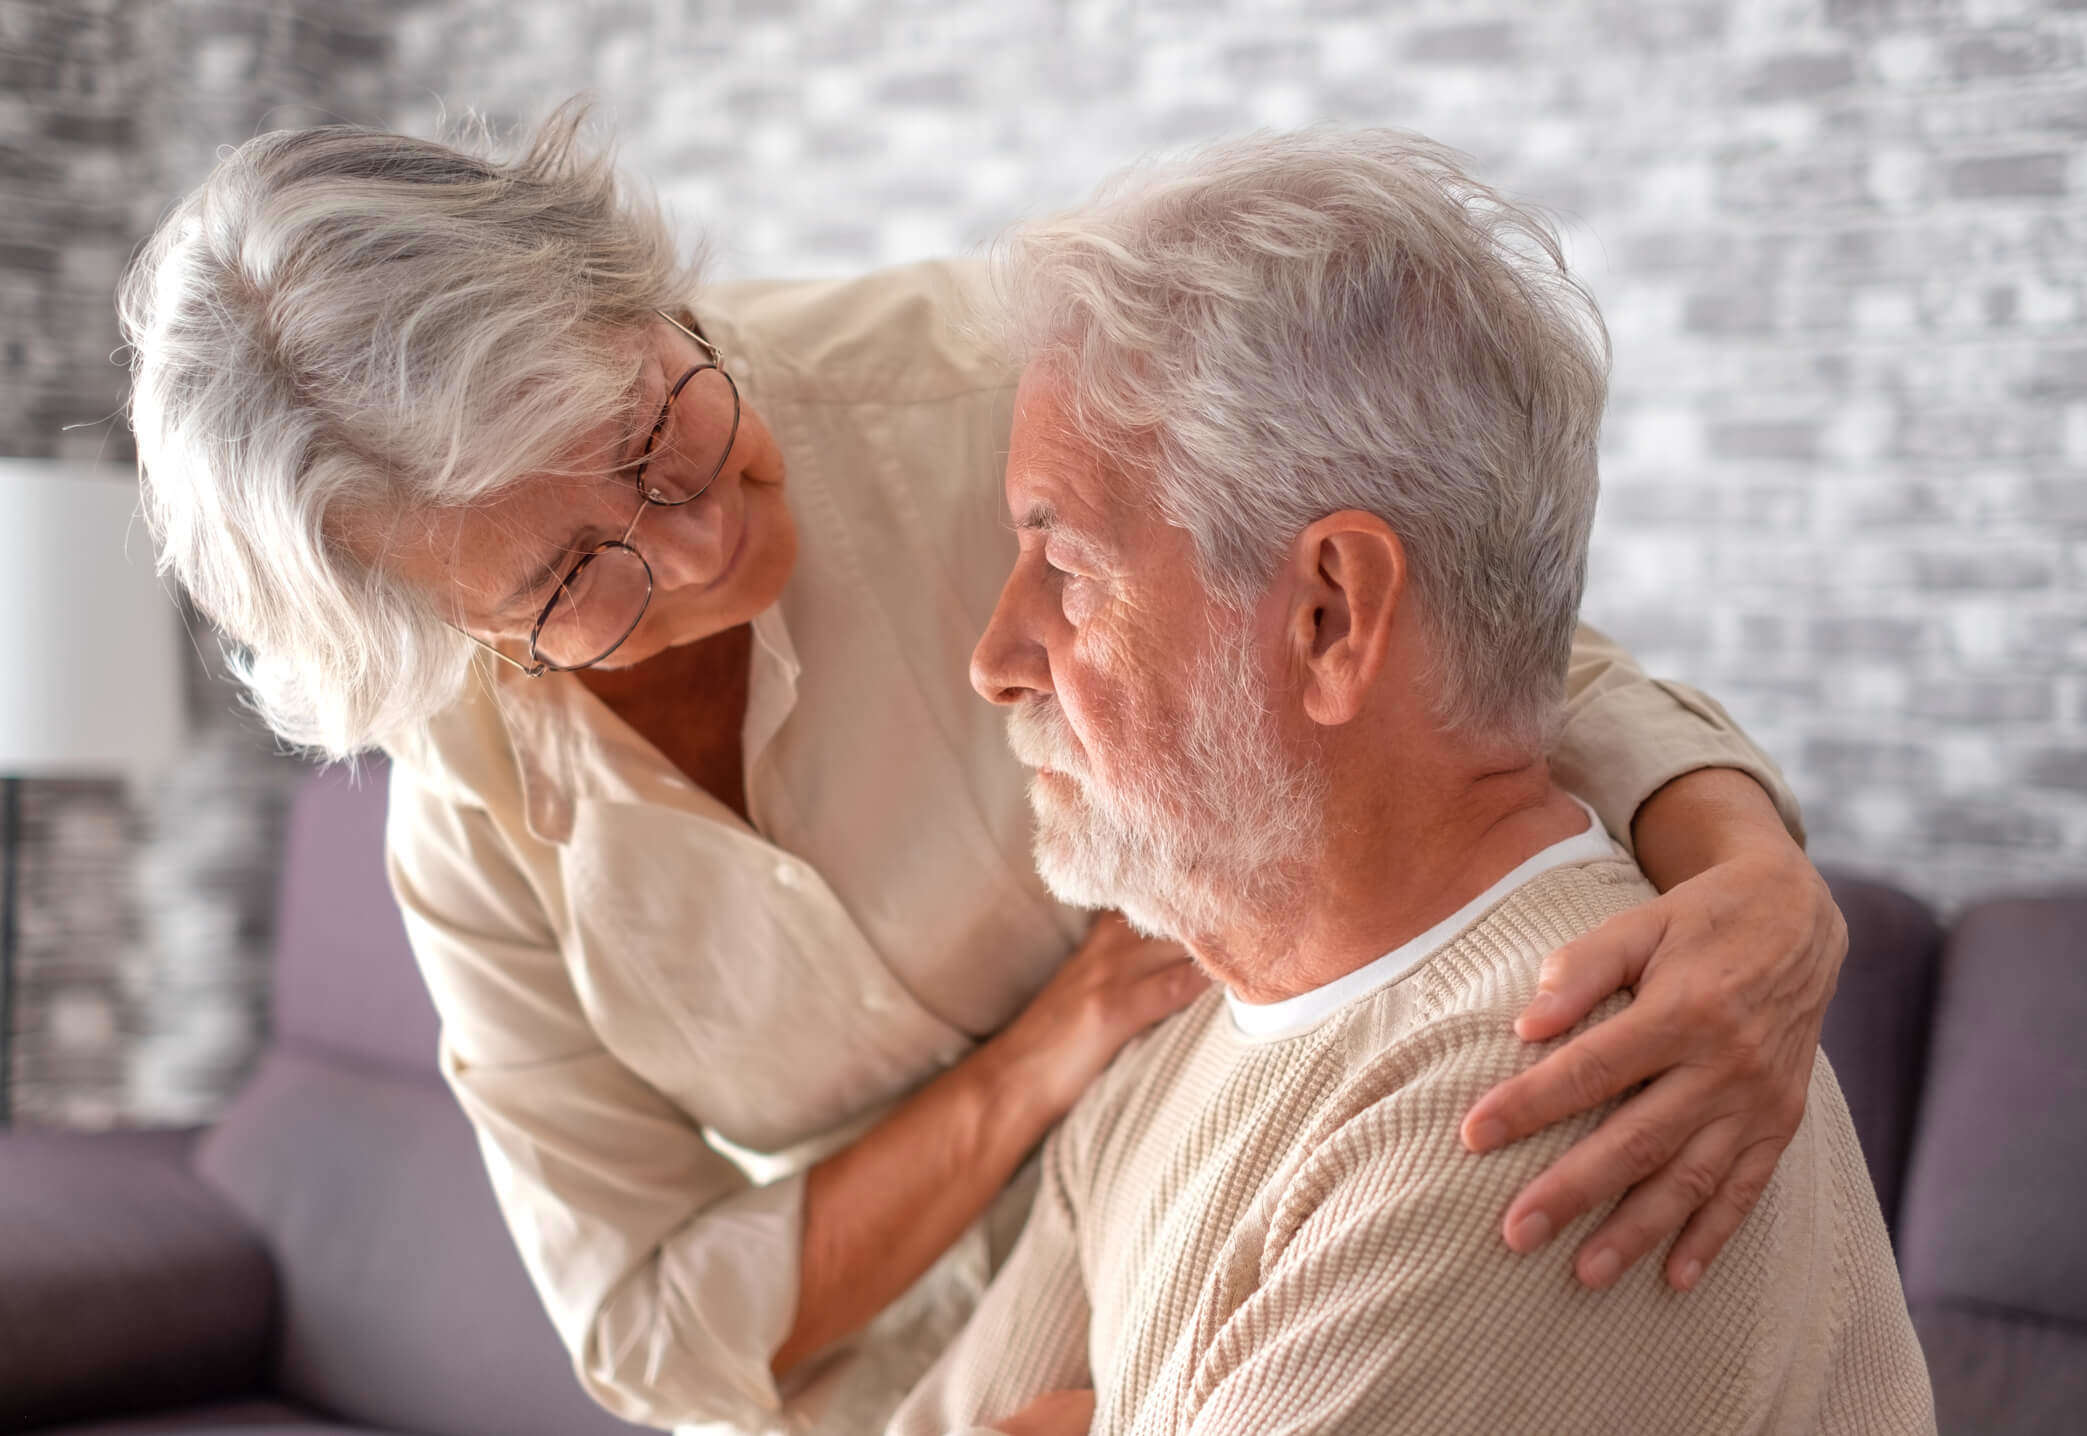 An older woman comforting an older man with her arms around his shoulders